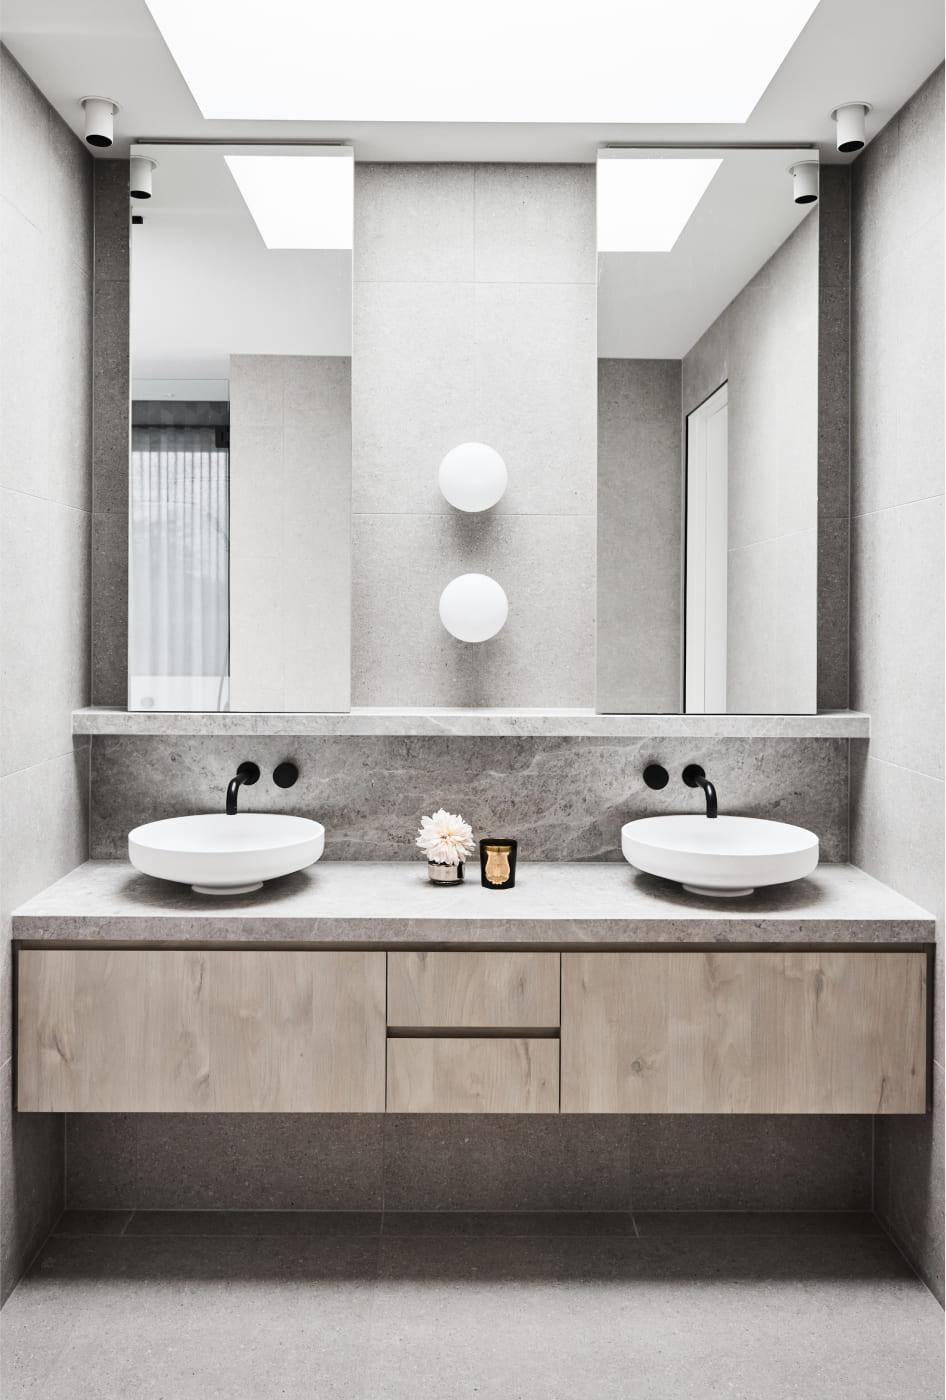 Ensuite cabinetry and basins with earthy colour palette